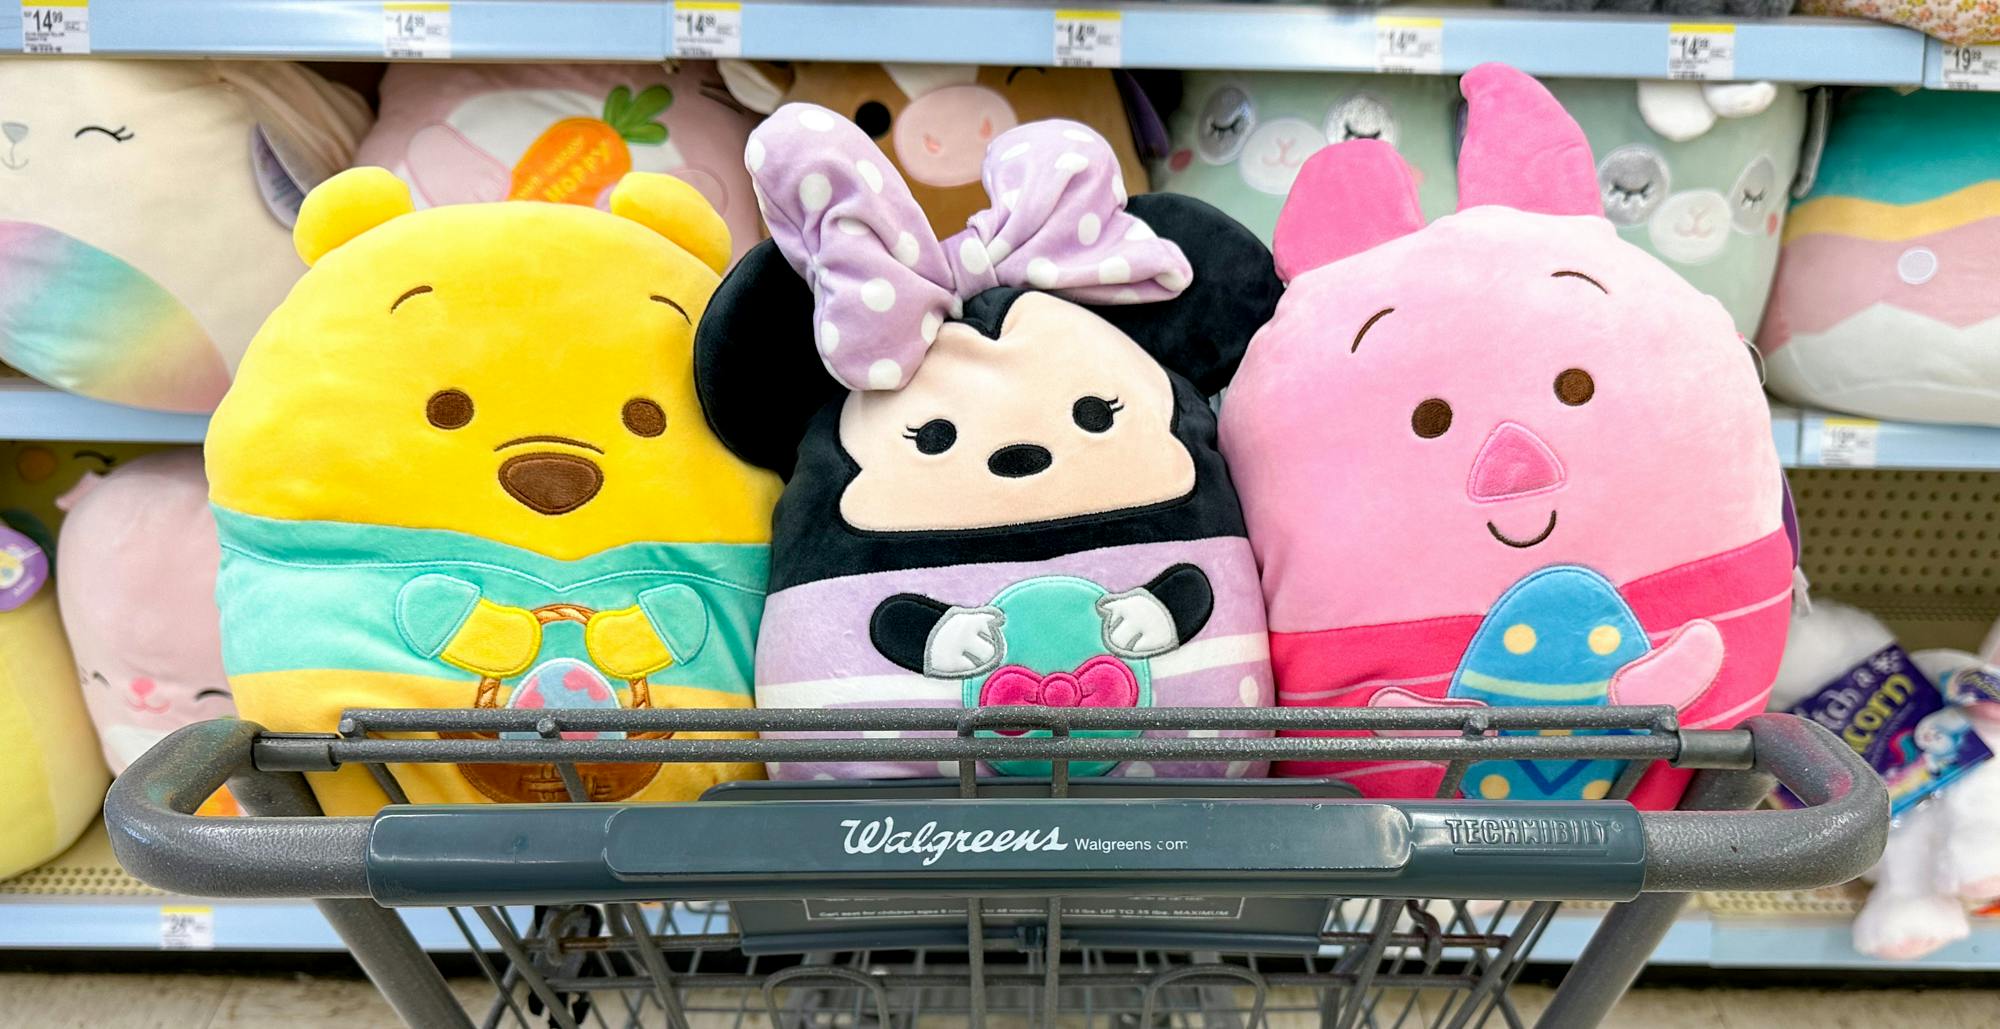 On the Hunt for More Squishmallows? Walgreens Has Them in Stock — And on Sale Up to 50% Off!